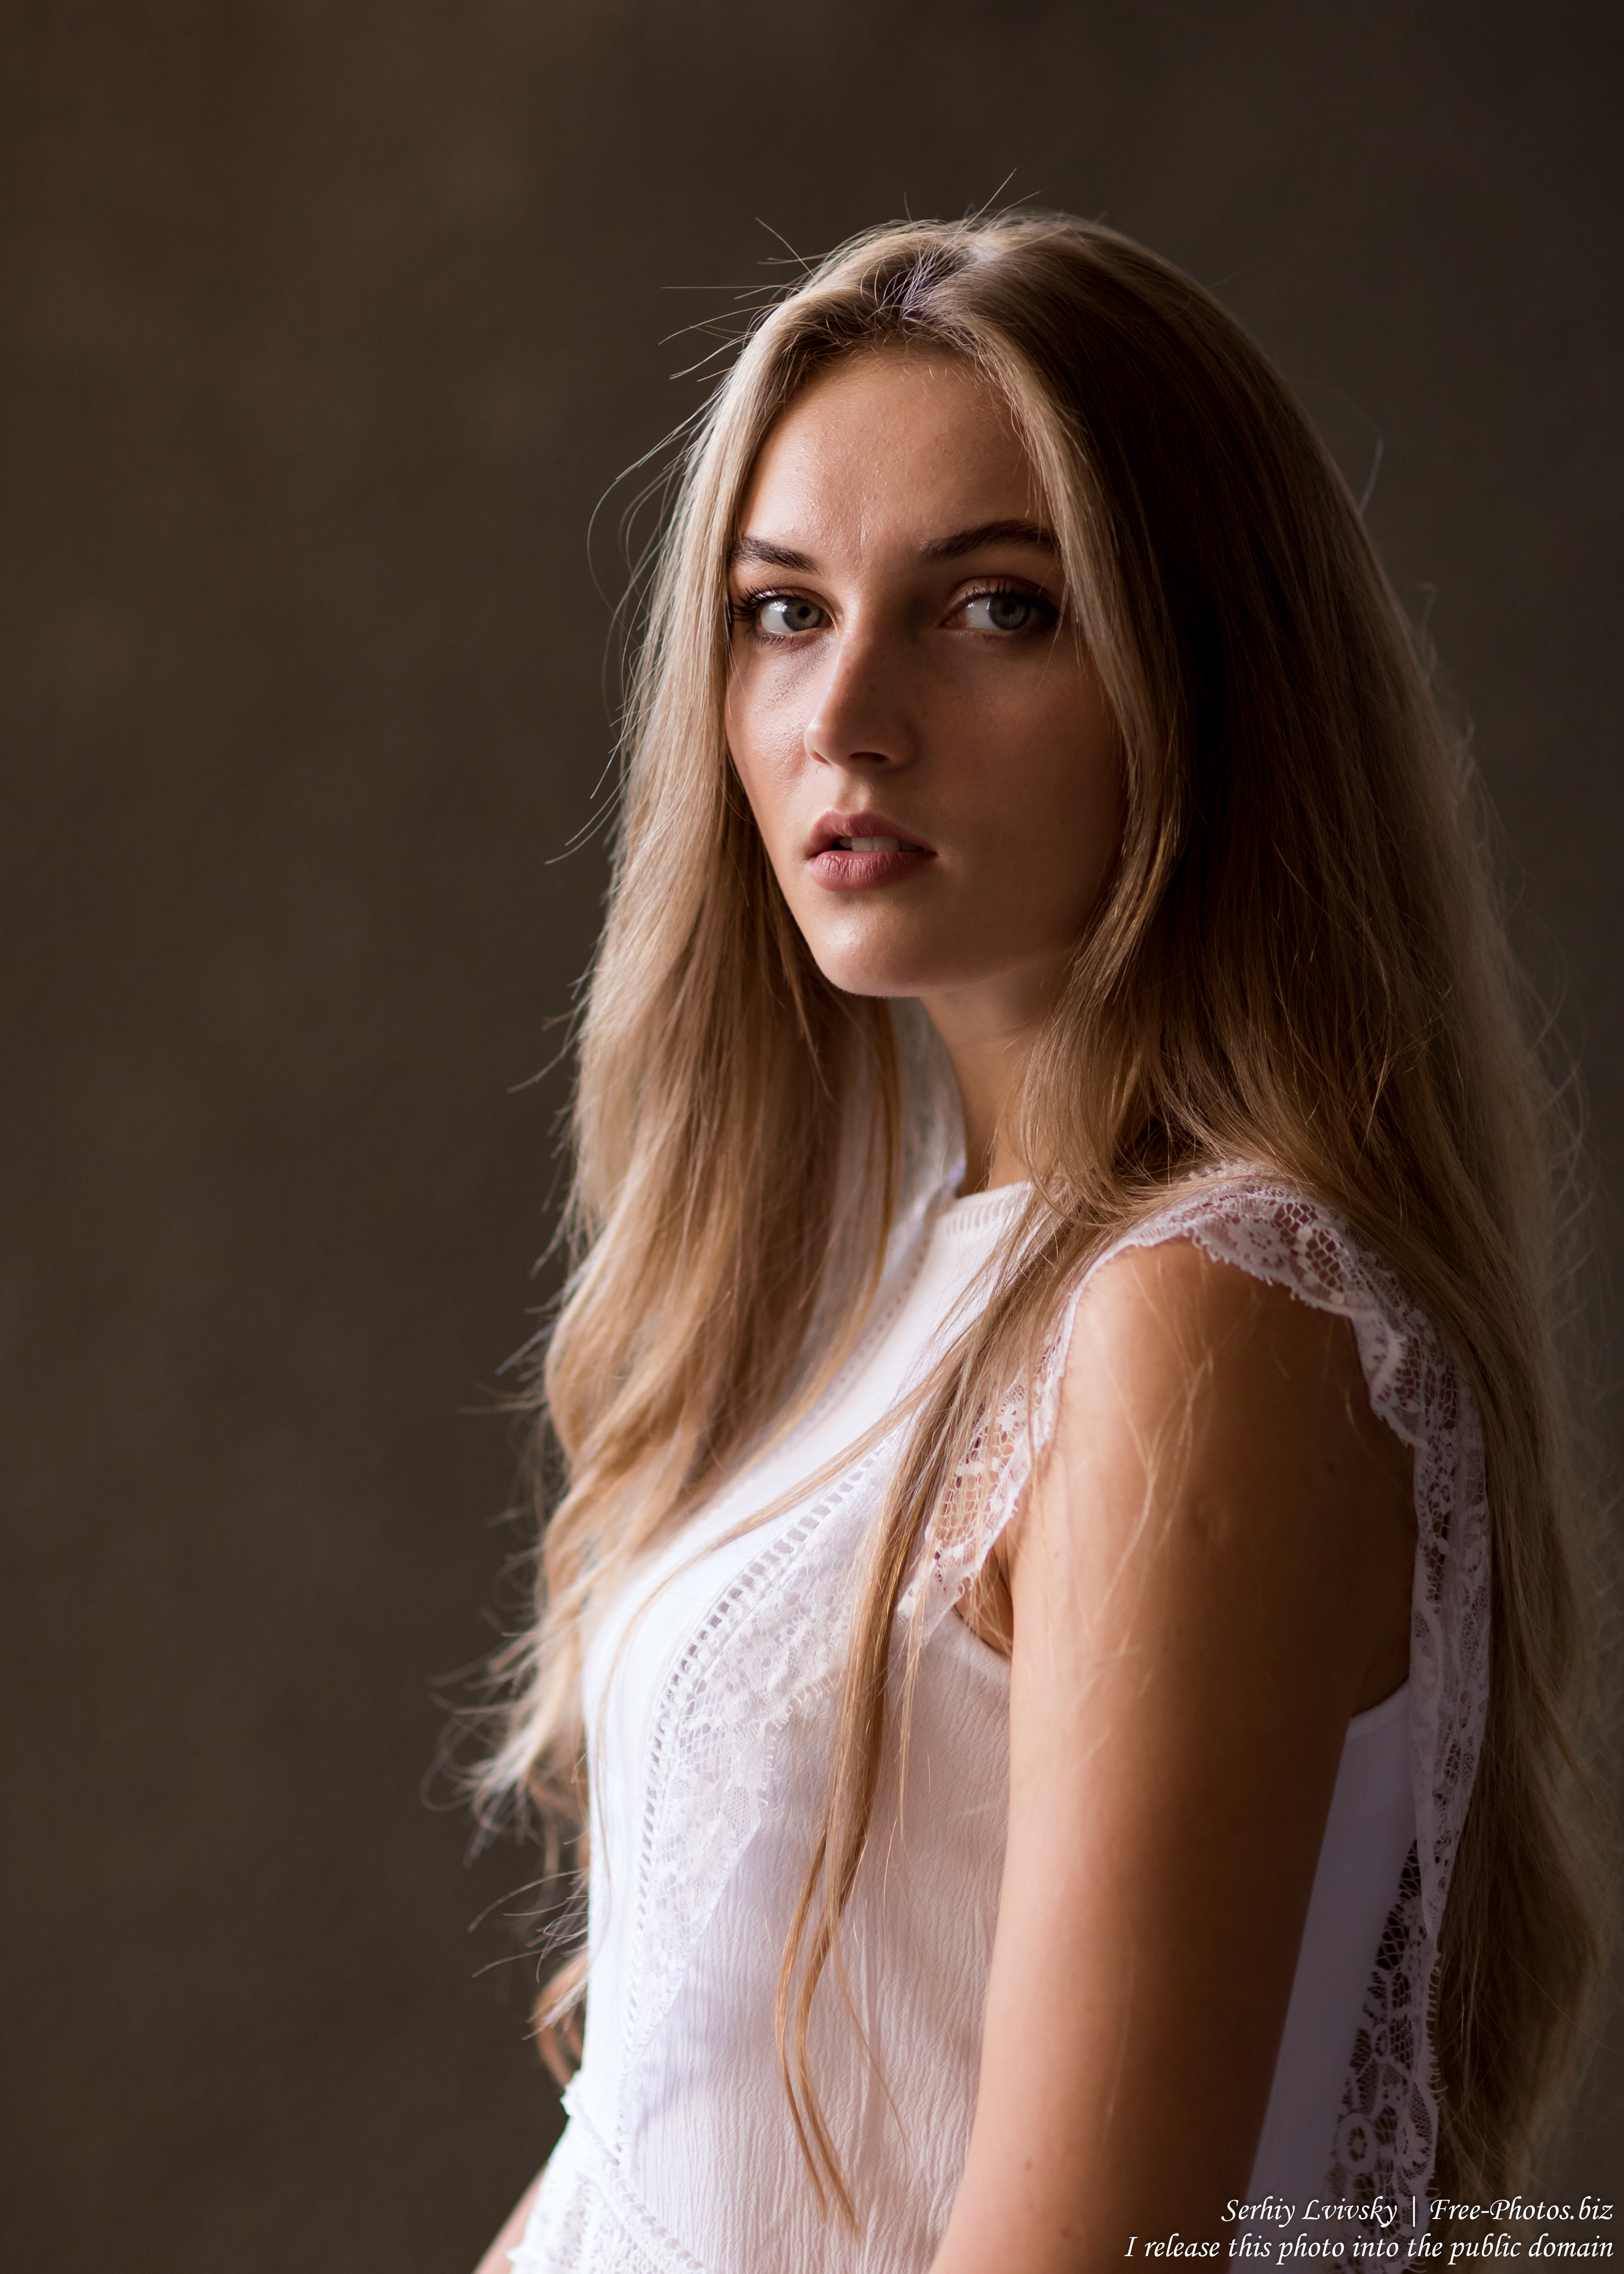 Yaryna - a 21-year-old natural blonde Catholic girl photographed in August 2019 by Serhiy Lvivsky, picture 11